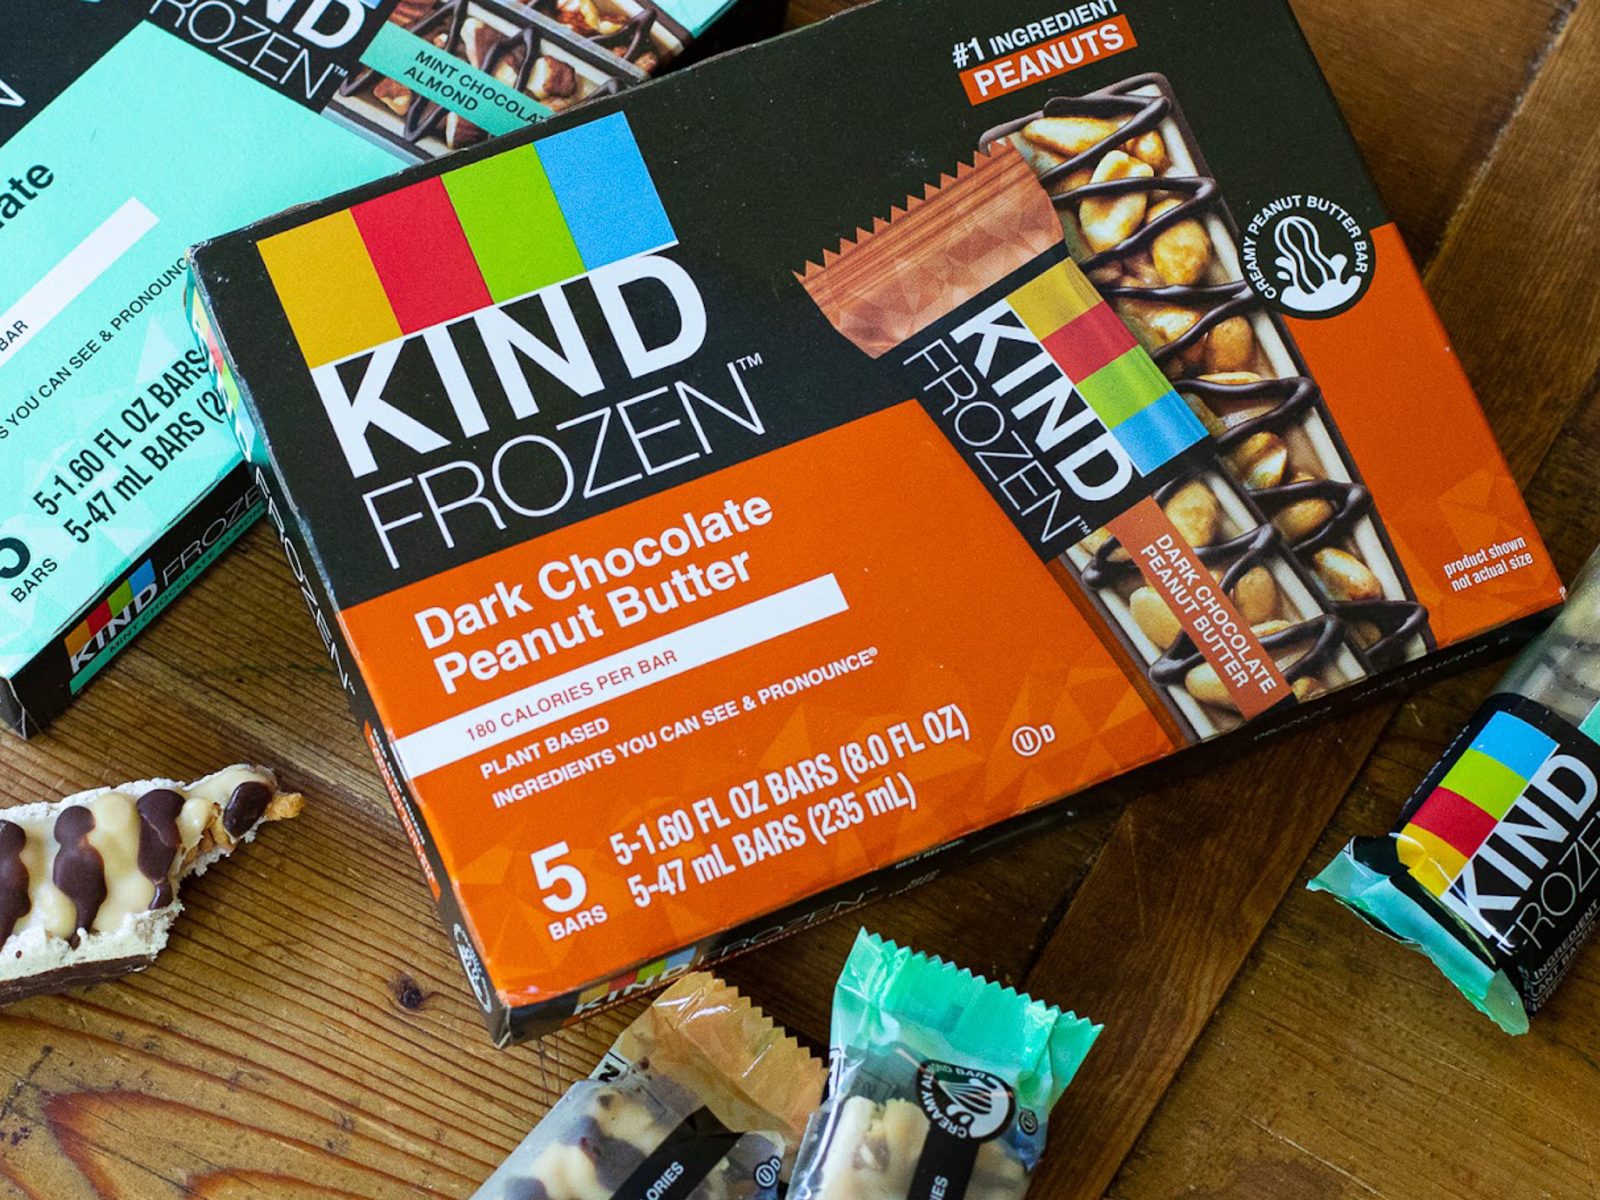 Kind Frozen Bars As Low As FREE At Kroger